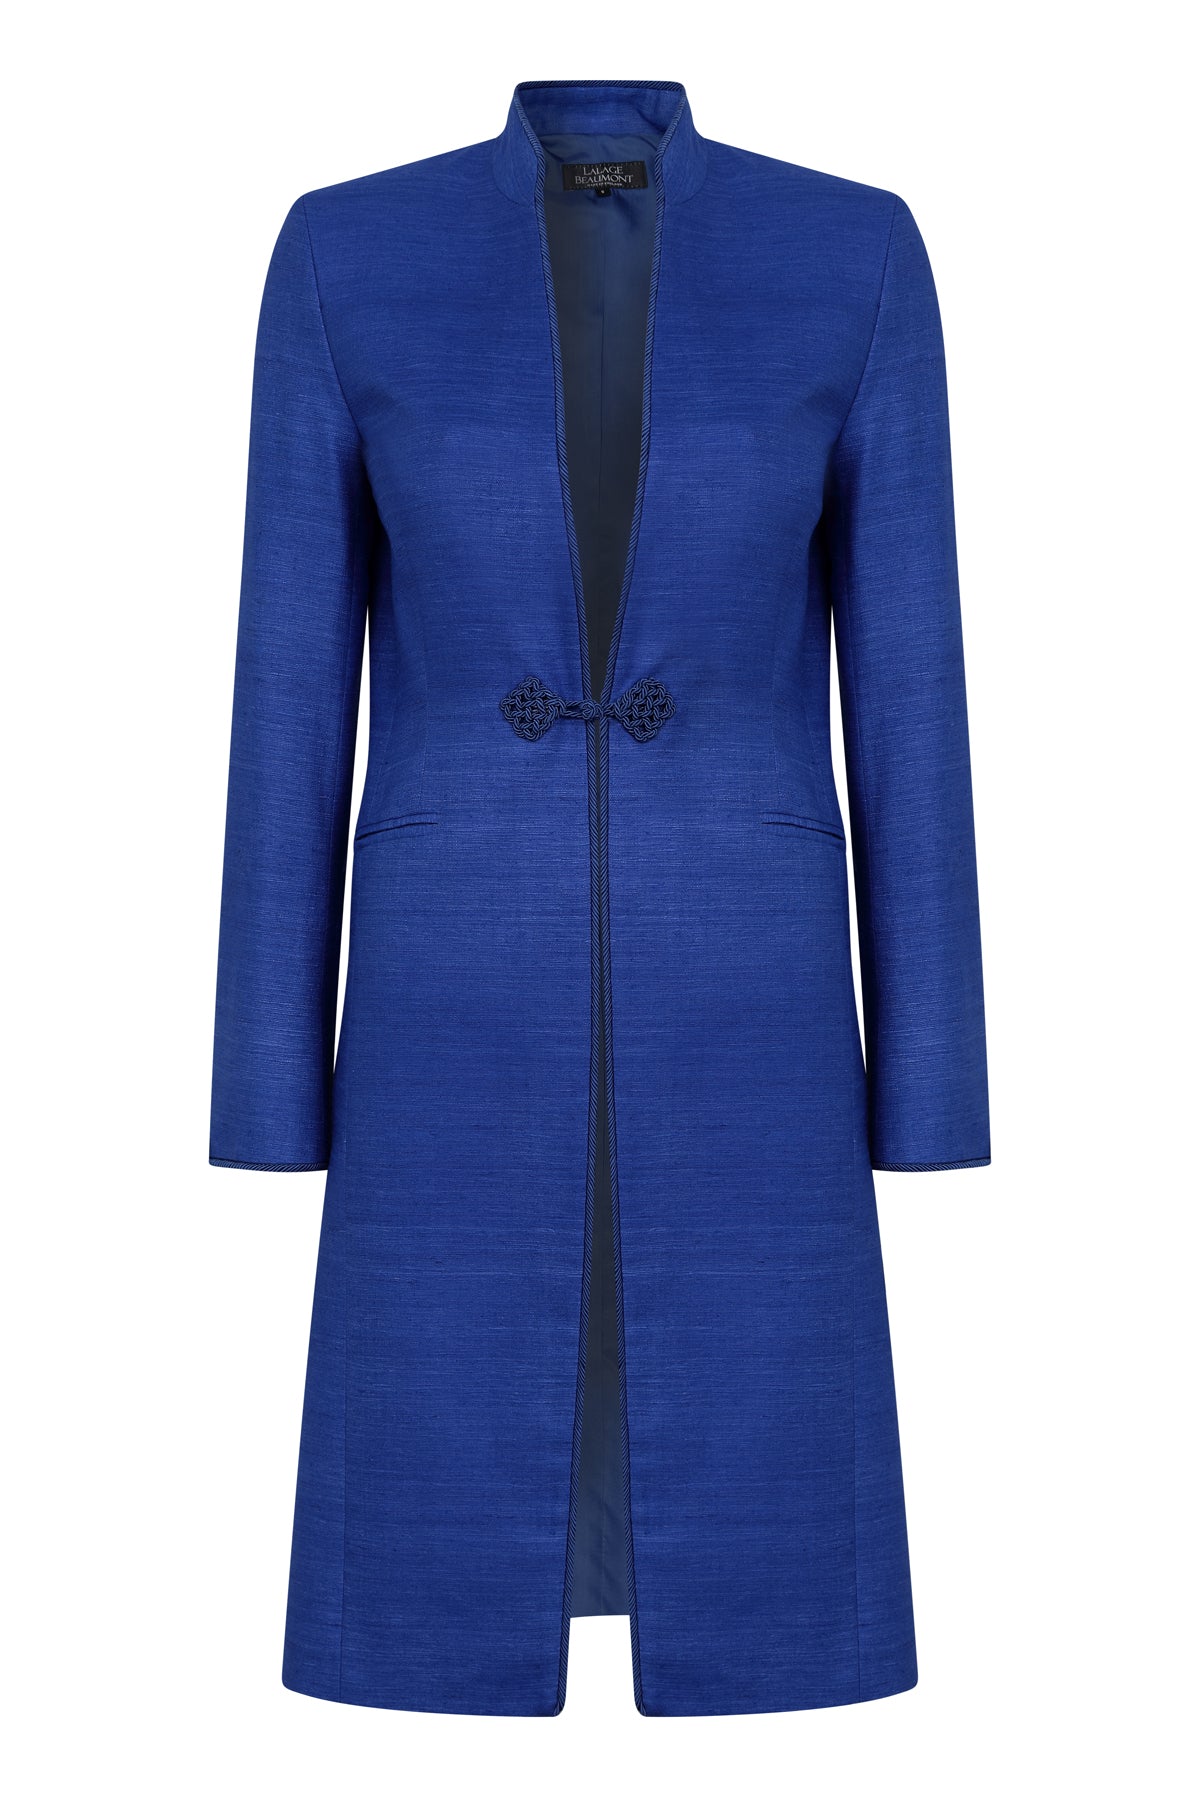 sapphire blue dress coat for weddings and events